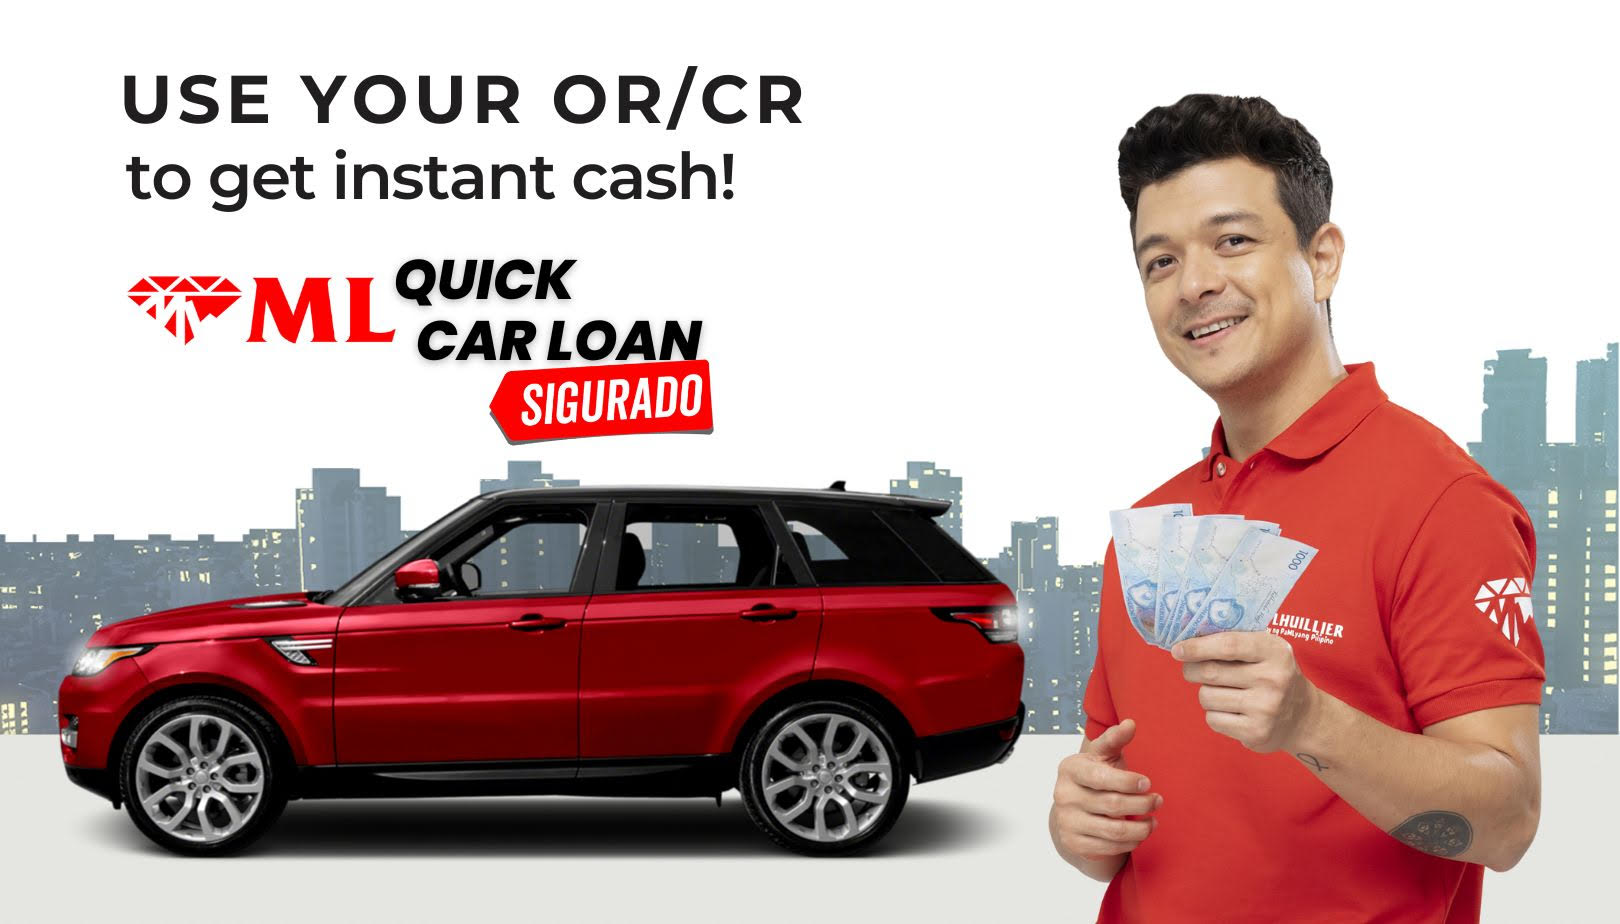 Here are some tips and reminders to keep in mind when applying for a car loan